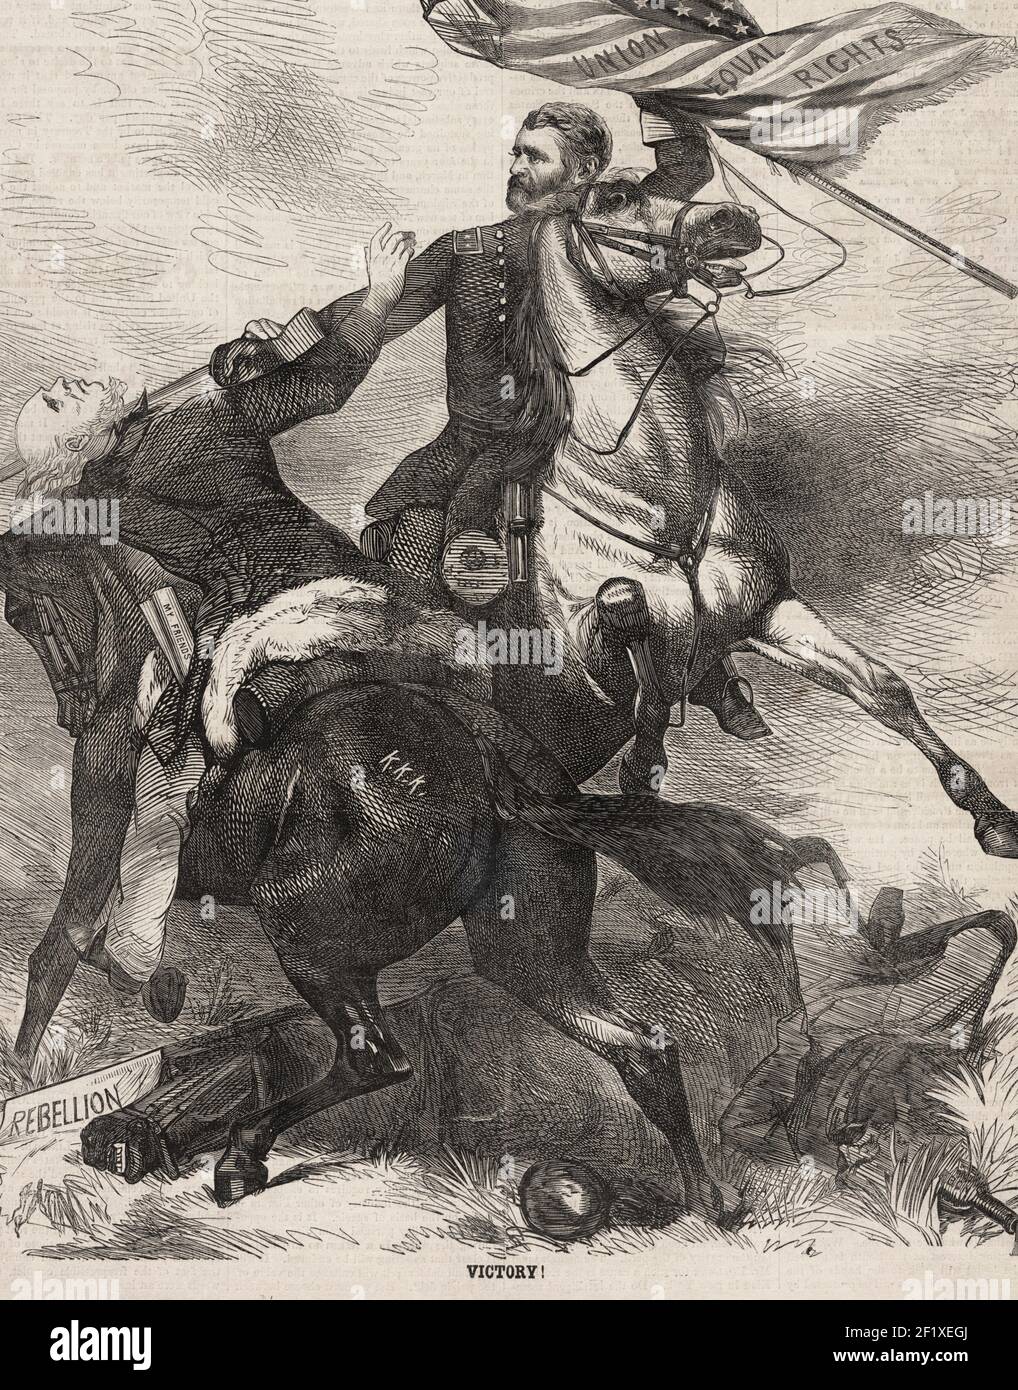 Victory!  Caricature showing Ulysses S. Grant, on horseback, carrying U.S. flag labeled 'Union equal rights' and beheading Horatio Seymour, who is riding a horse labeled K.K.K. - Political Cartoon, 1868 Presidential Election Stock Photo